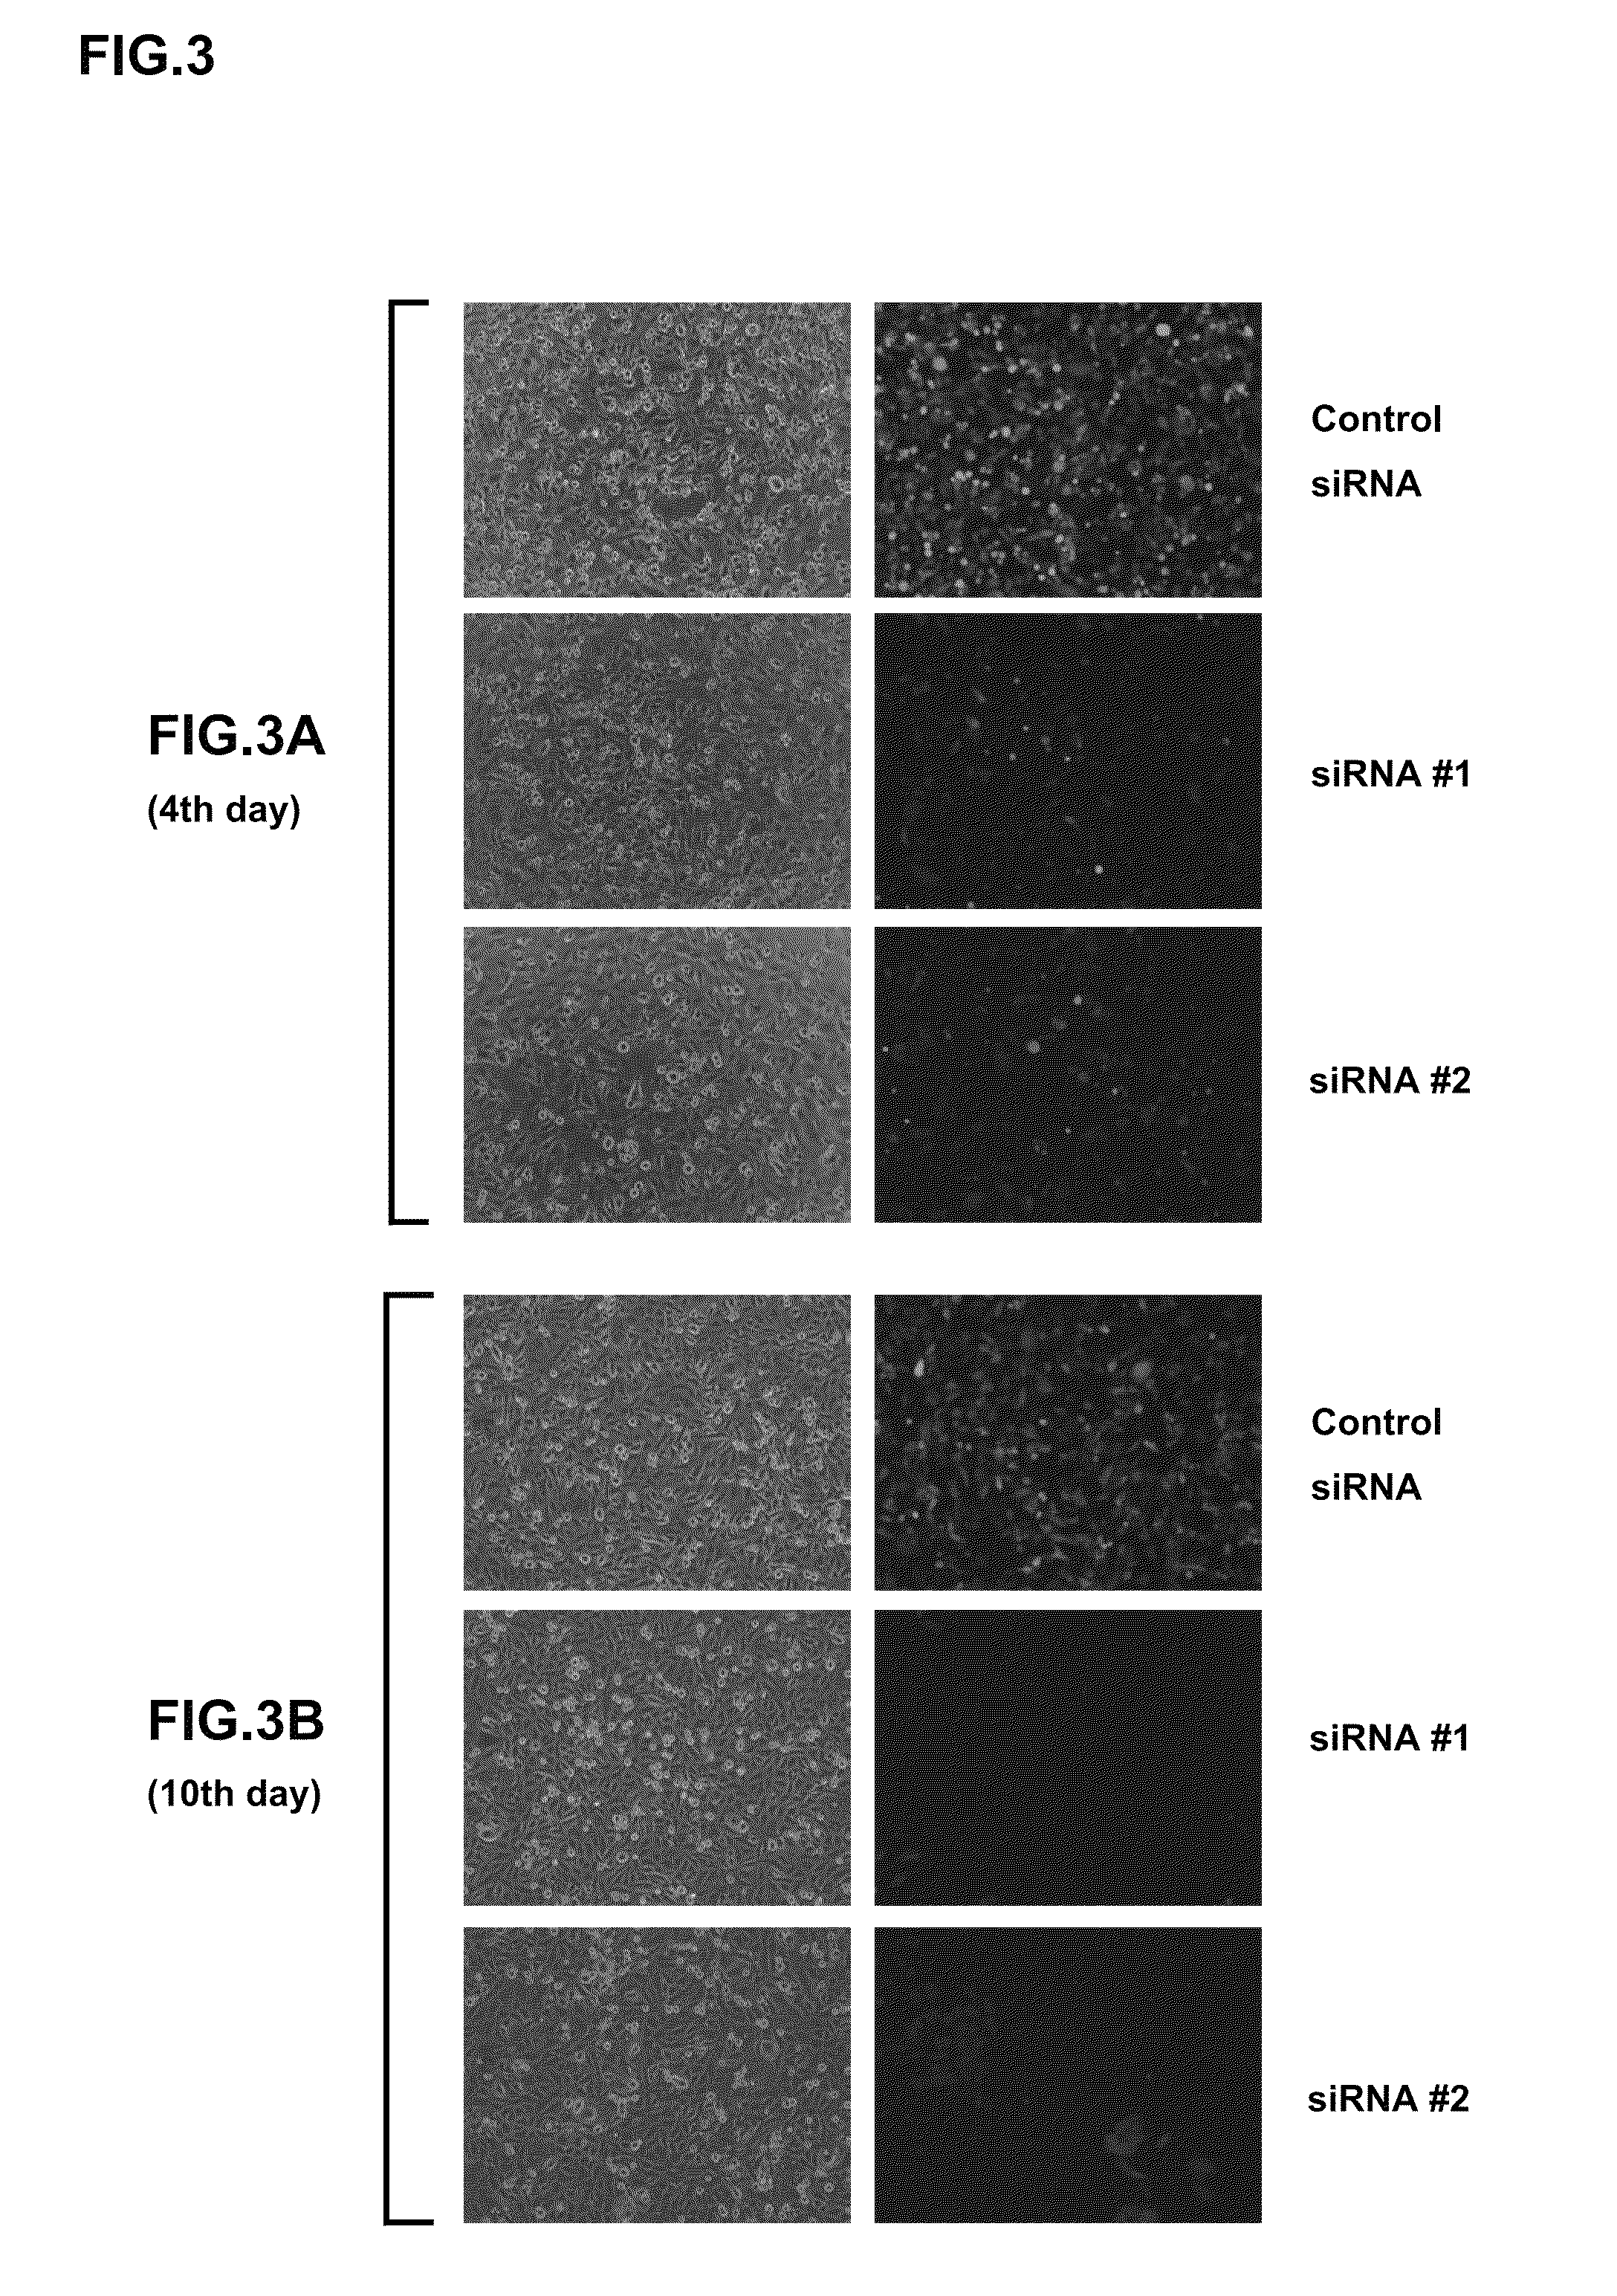 Vectors for generating pluripotent stem cells and methods of producing pluripotent stem cells using the same